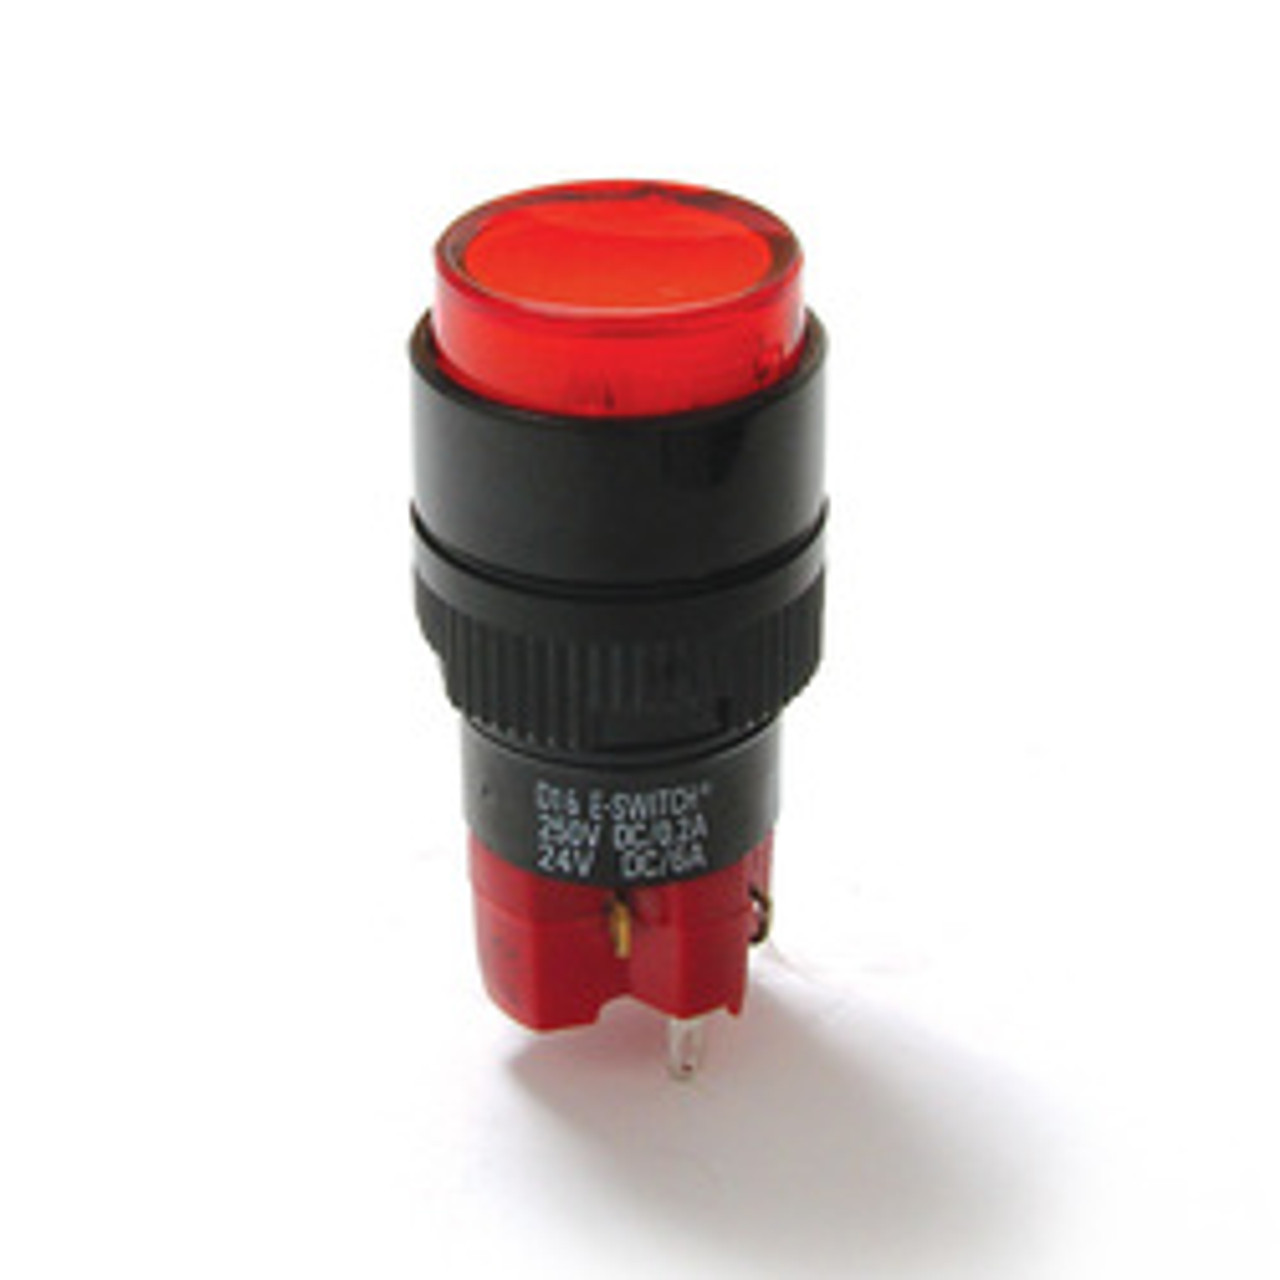 E-Switch D16OAS11JGRNGRN Pushbutton Switches